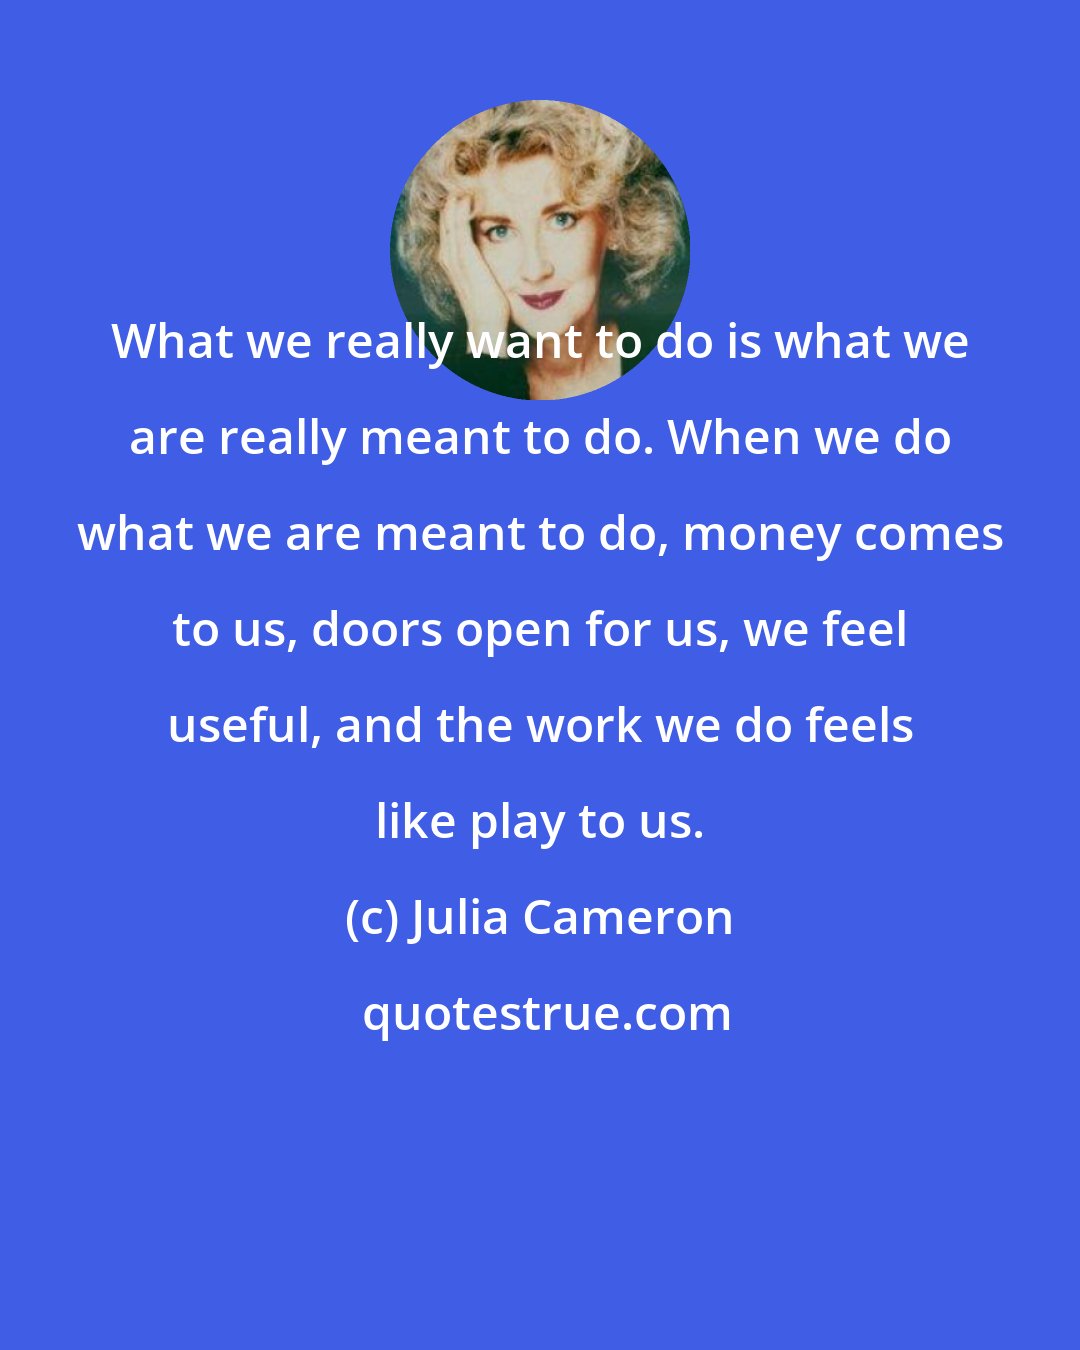 Julia Cameron: What we really want to do is what we are really meant to do. When we do what we are meant to do, money comes to us, doors open for us, we feel useful, and the work we do feels like play to us.